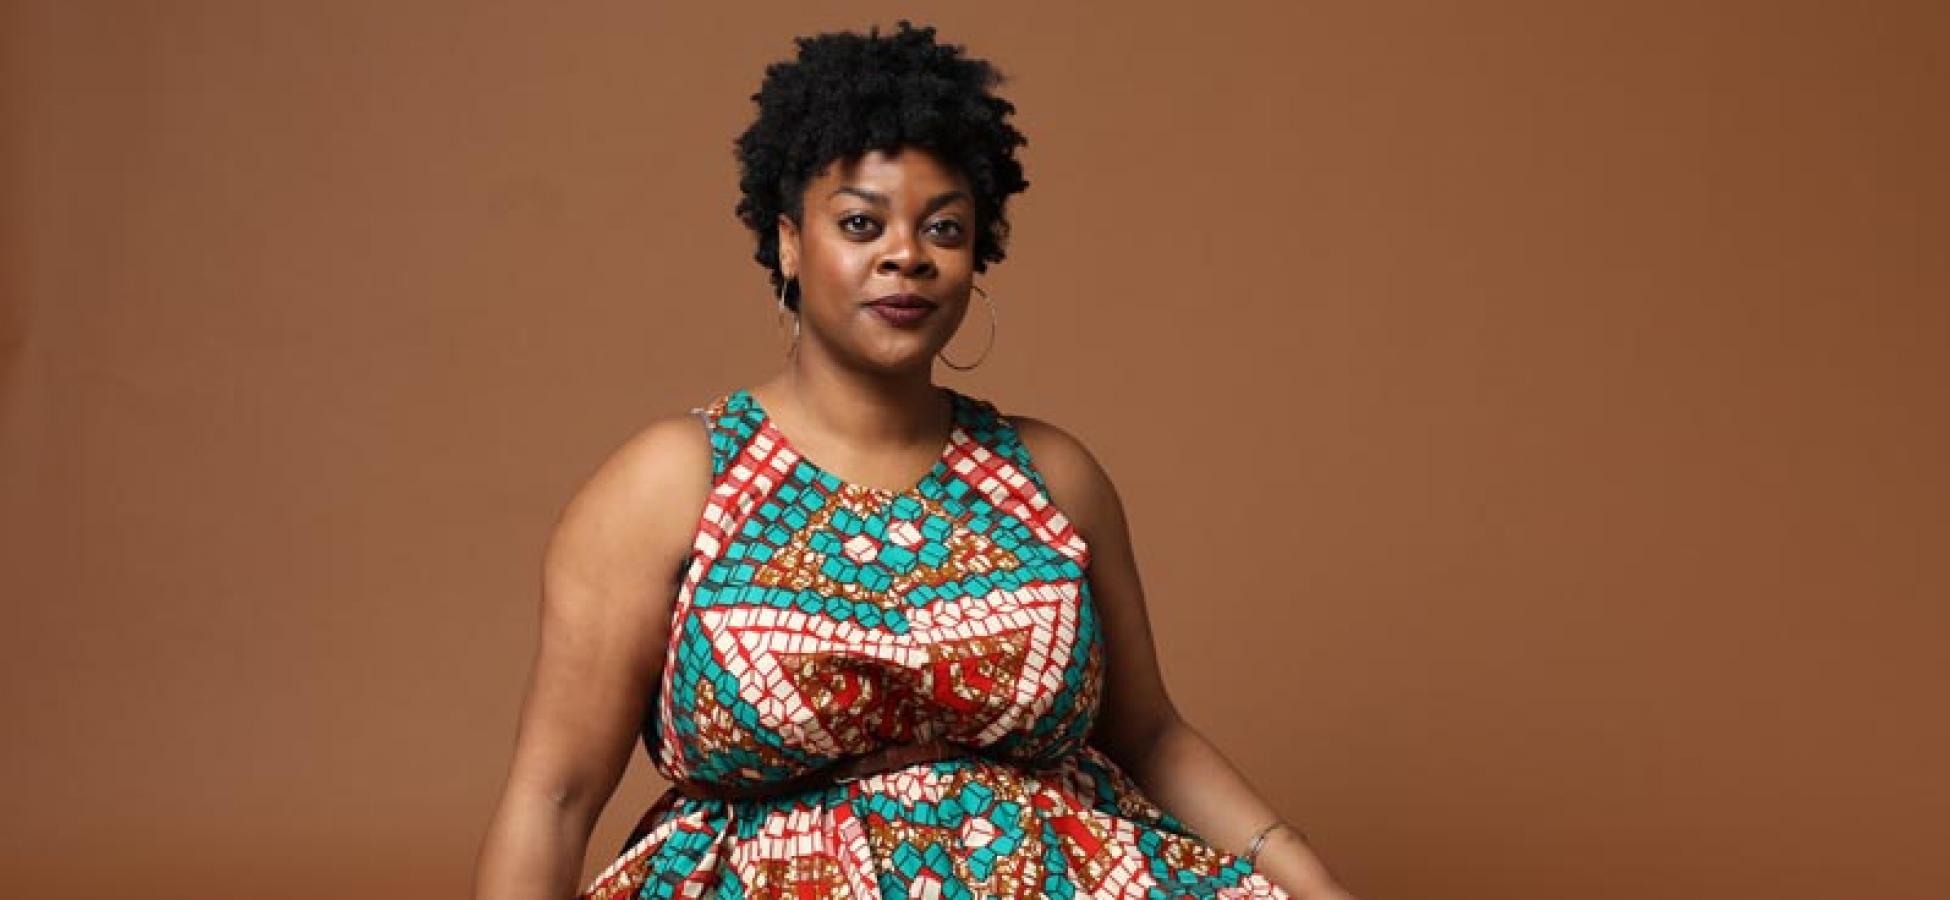 Rashawn Nadine Scott sits on the floor in a patterned sleeveless dress looking comfortable and confident